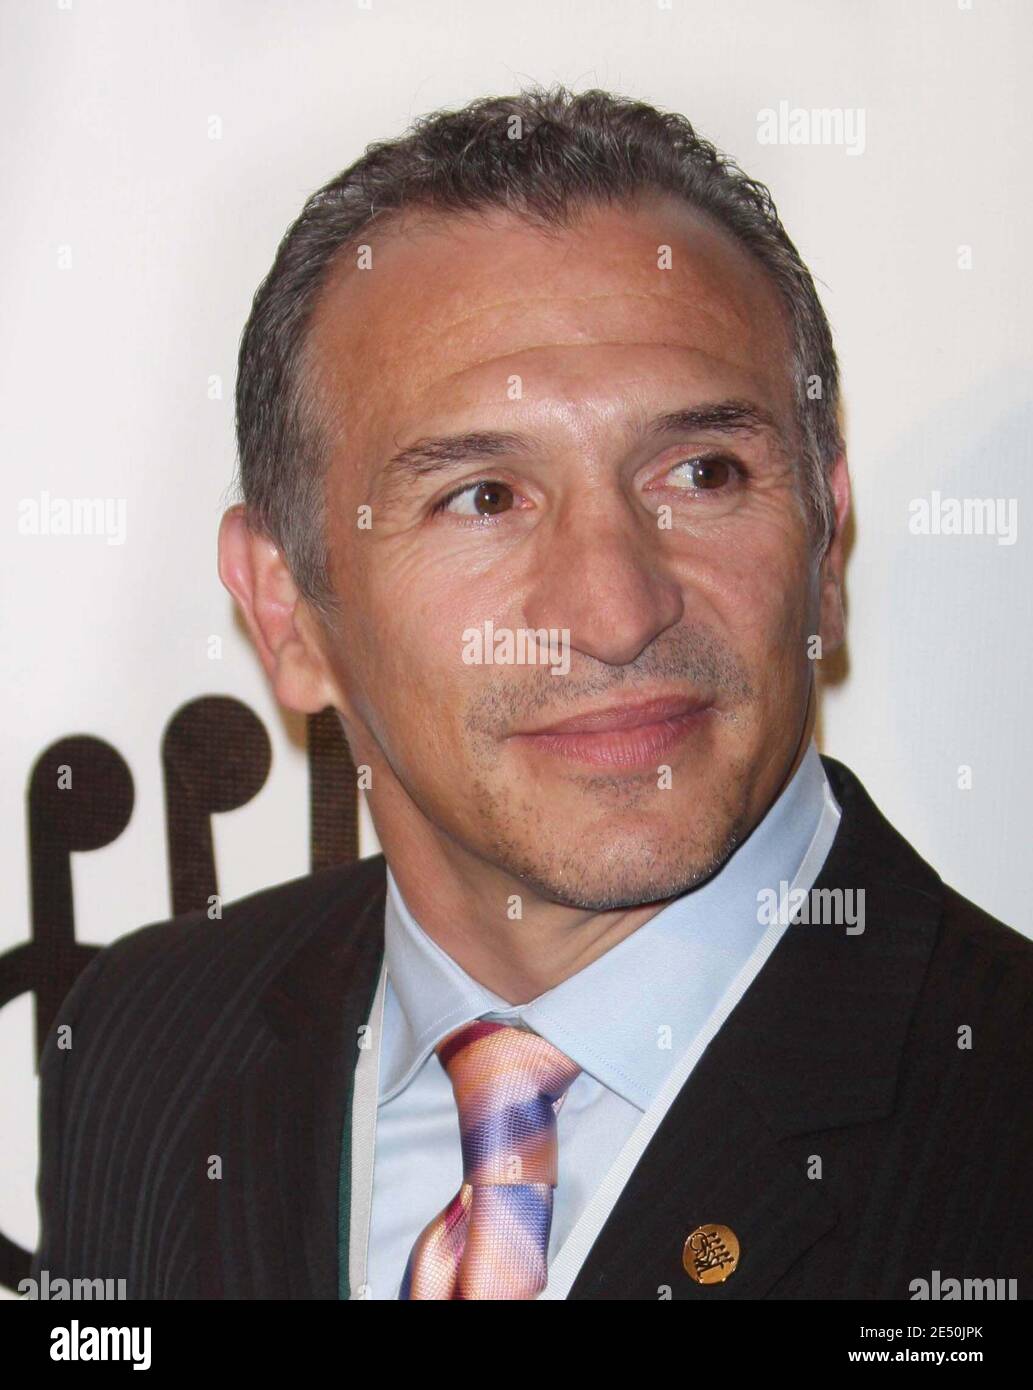 Ray boom boom mancini hi-res stock photography and images - Alamy